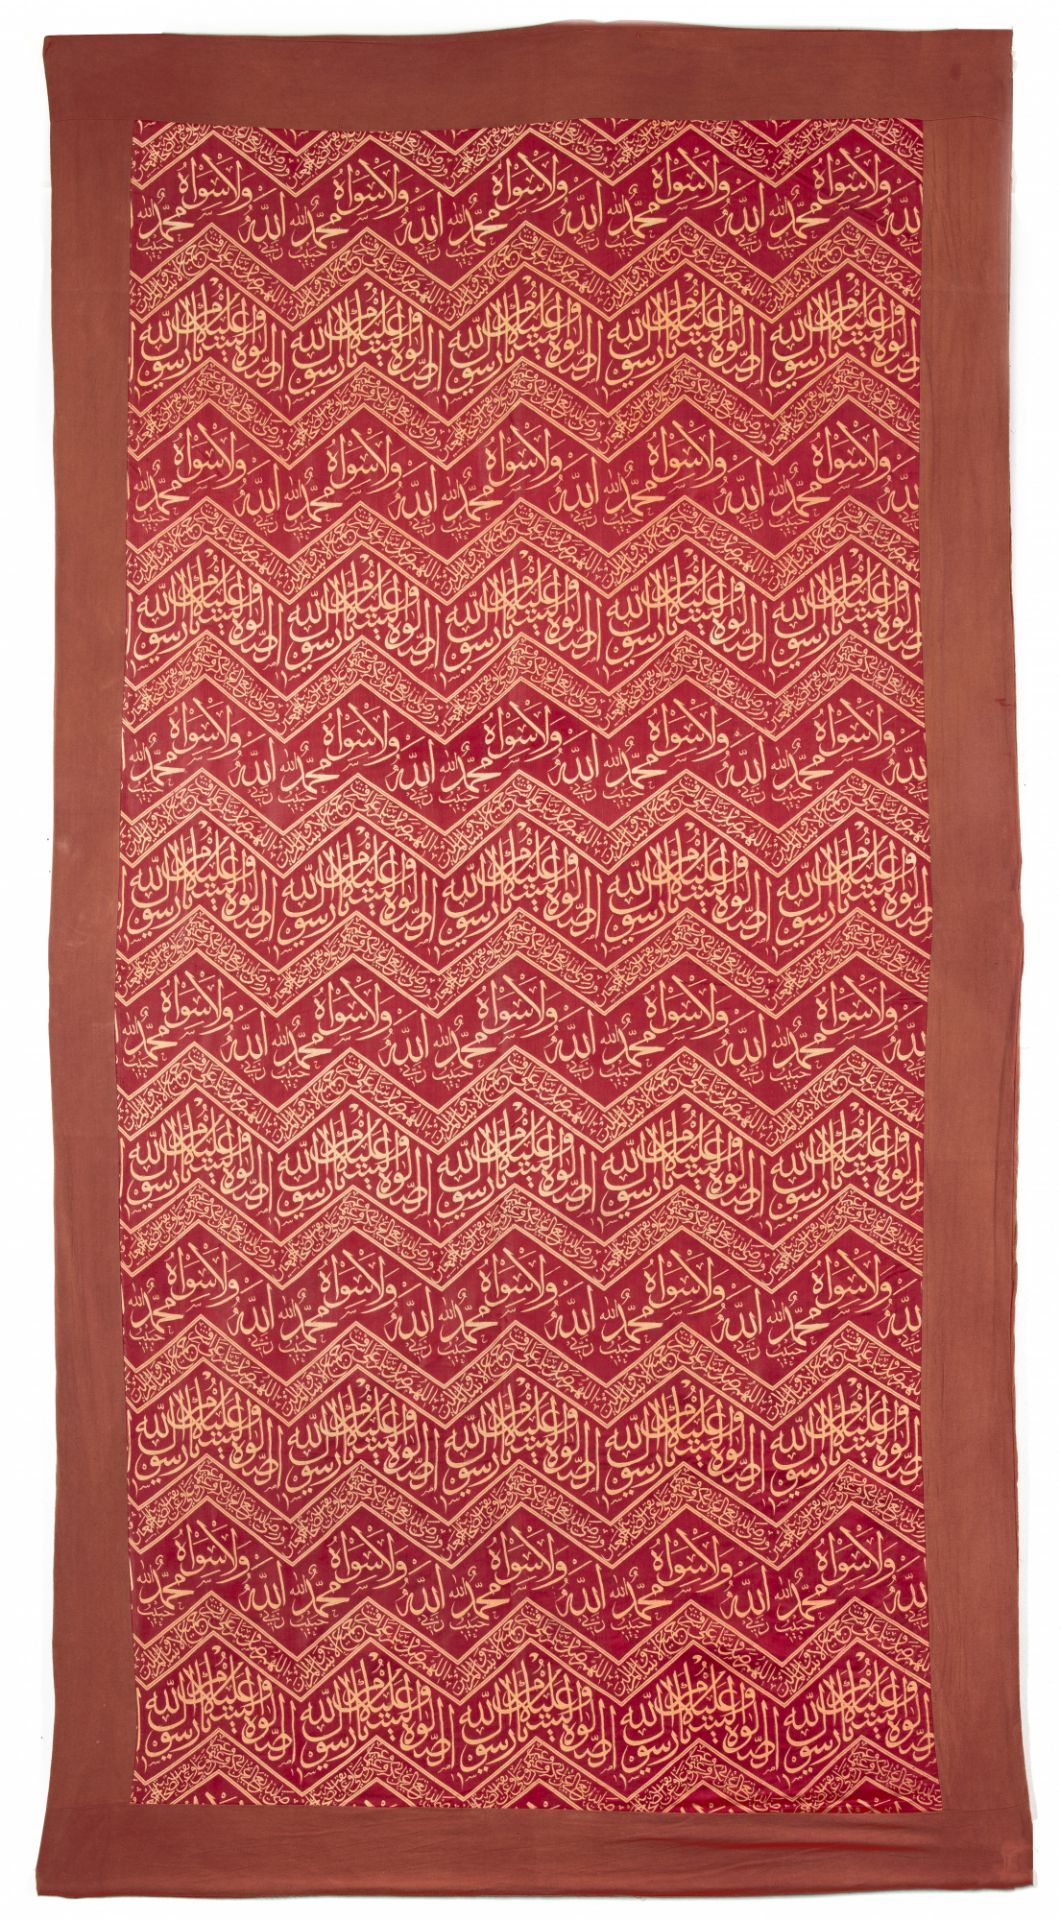 AN OTTOMAN WOVEN SILK LAMPAS-WEAVE TOMB COVER FRAGMENT TURKEY, LATE 19TH- EARLY 20TH CENTURY - Bild 2 aus 2